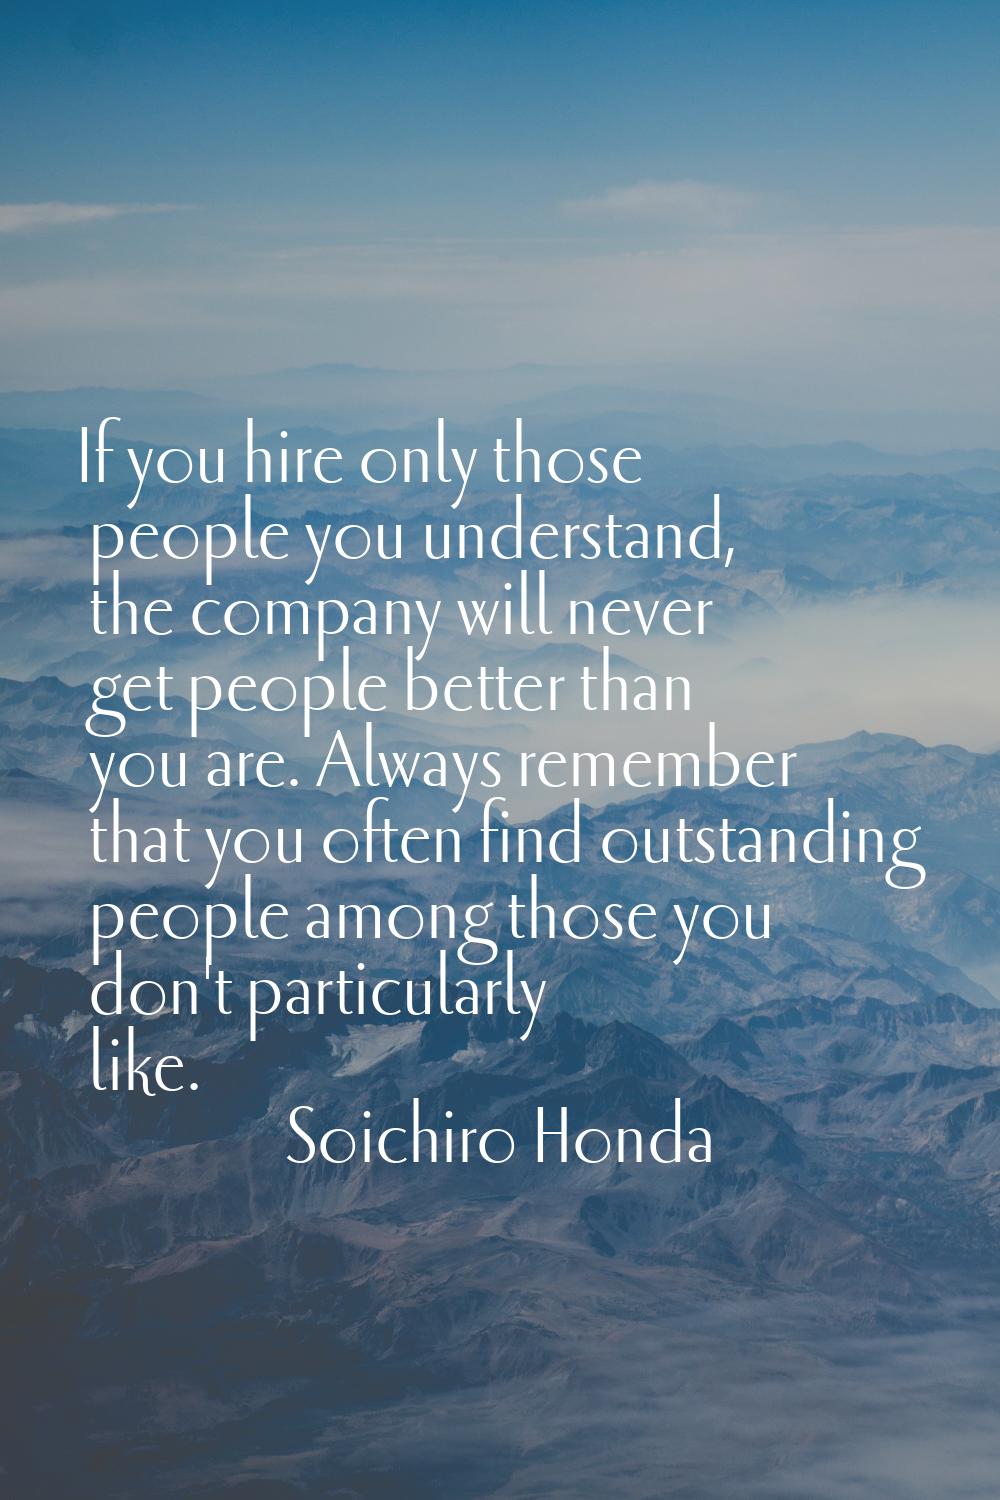 If you hire only those people you understand, the company will never get people better than you are